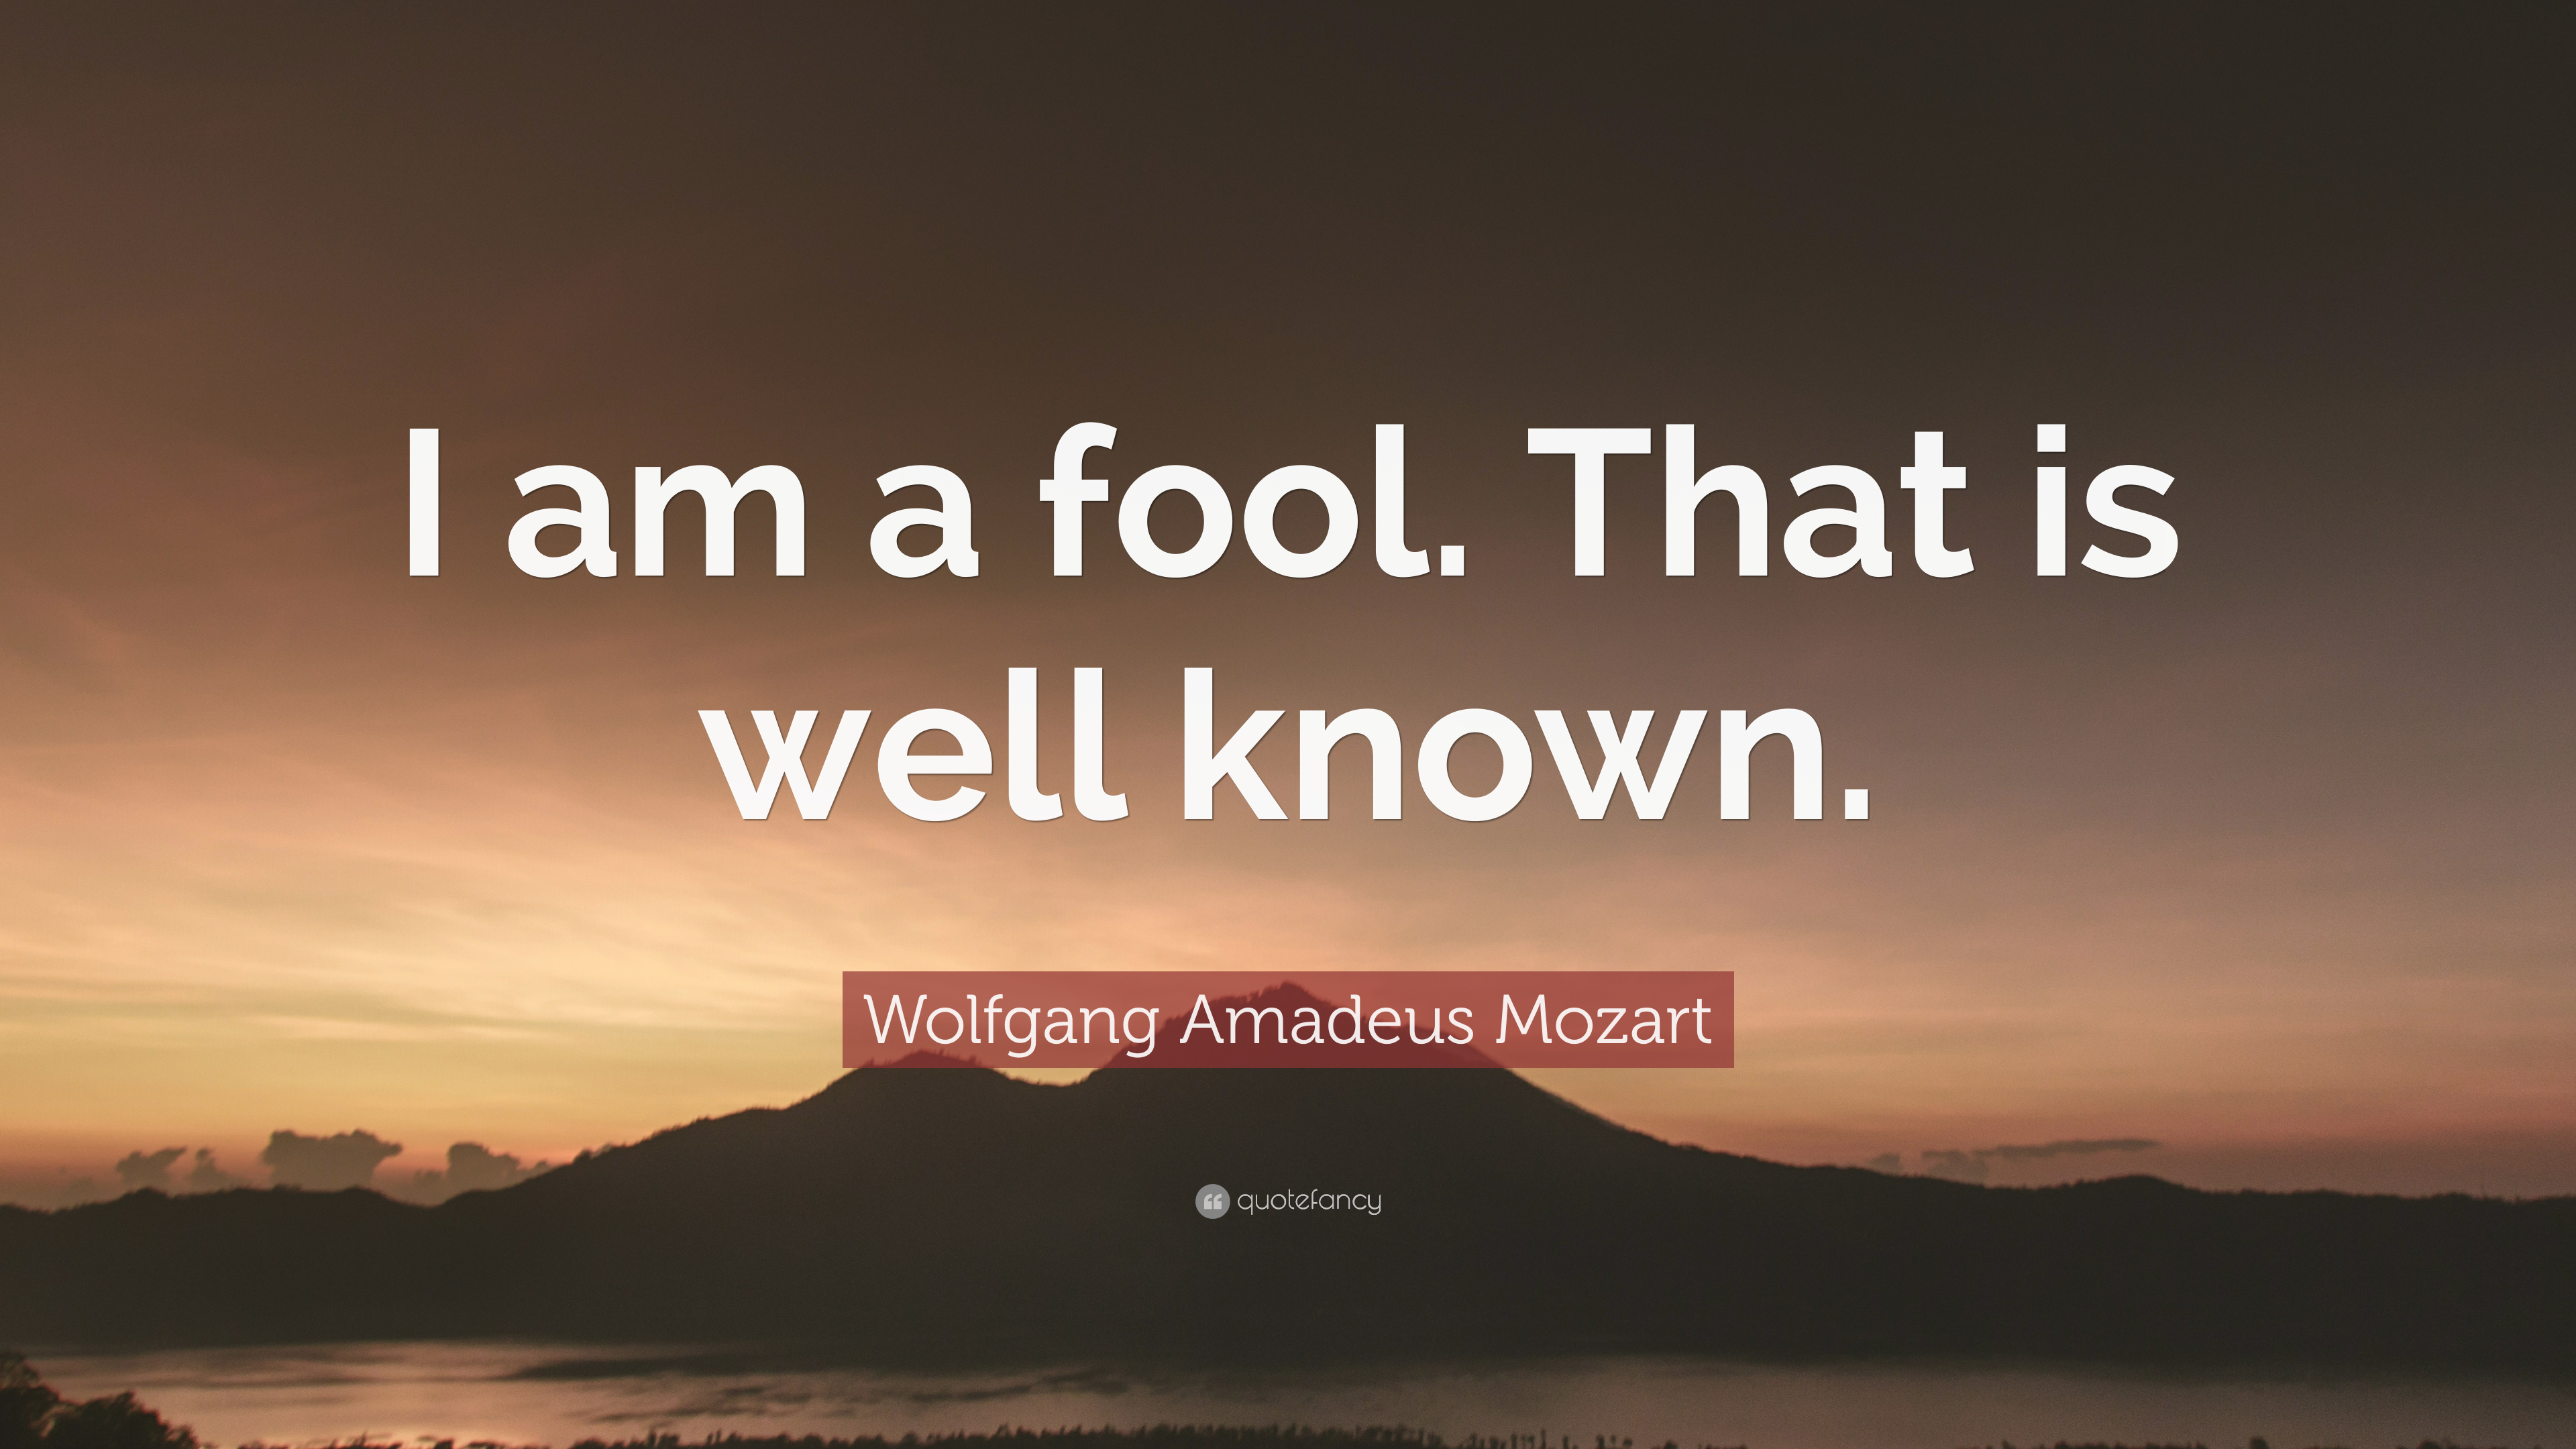 Wolfgang Amadeus Mozart Quote: “I am a fool. That is well